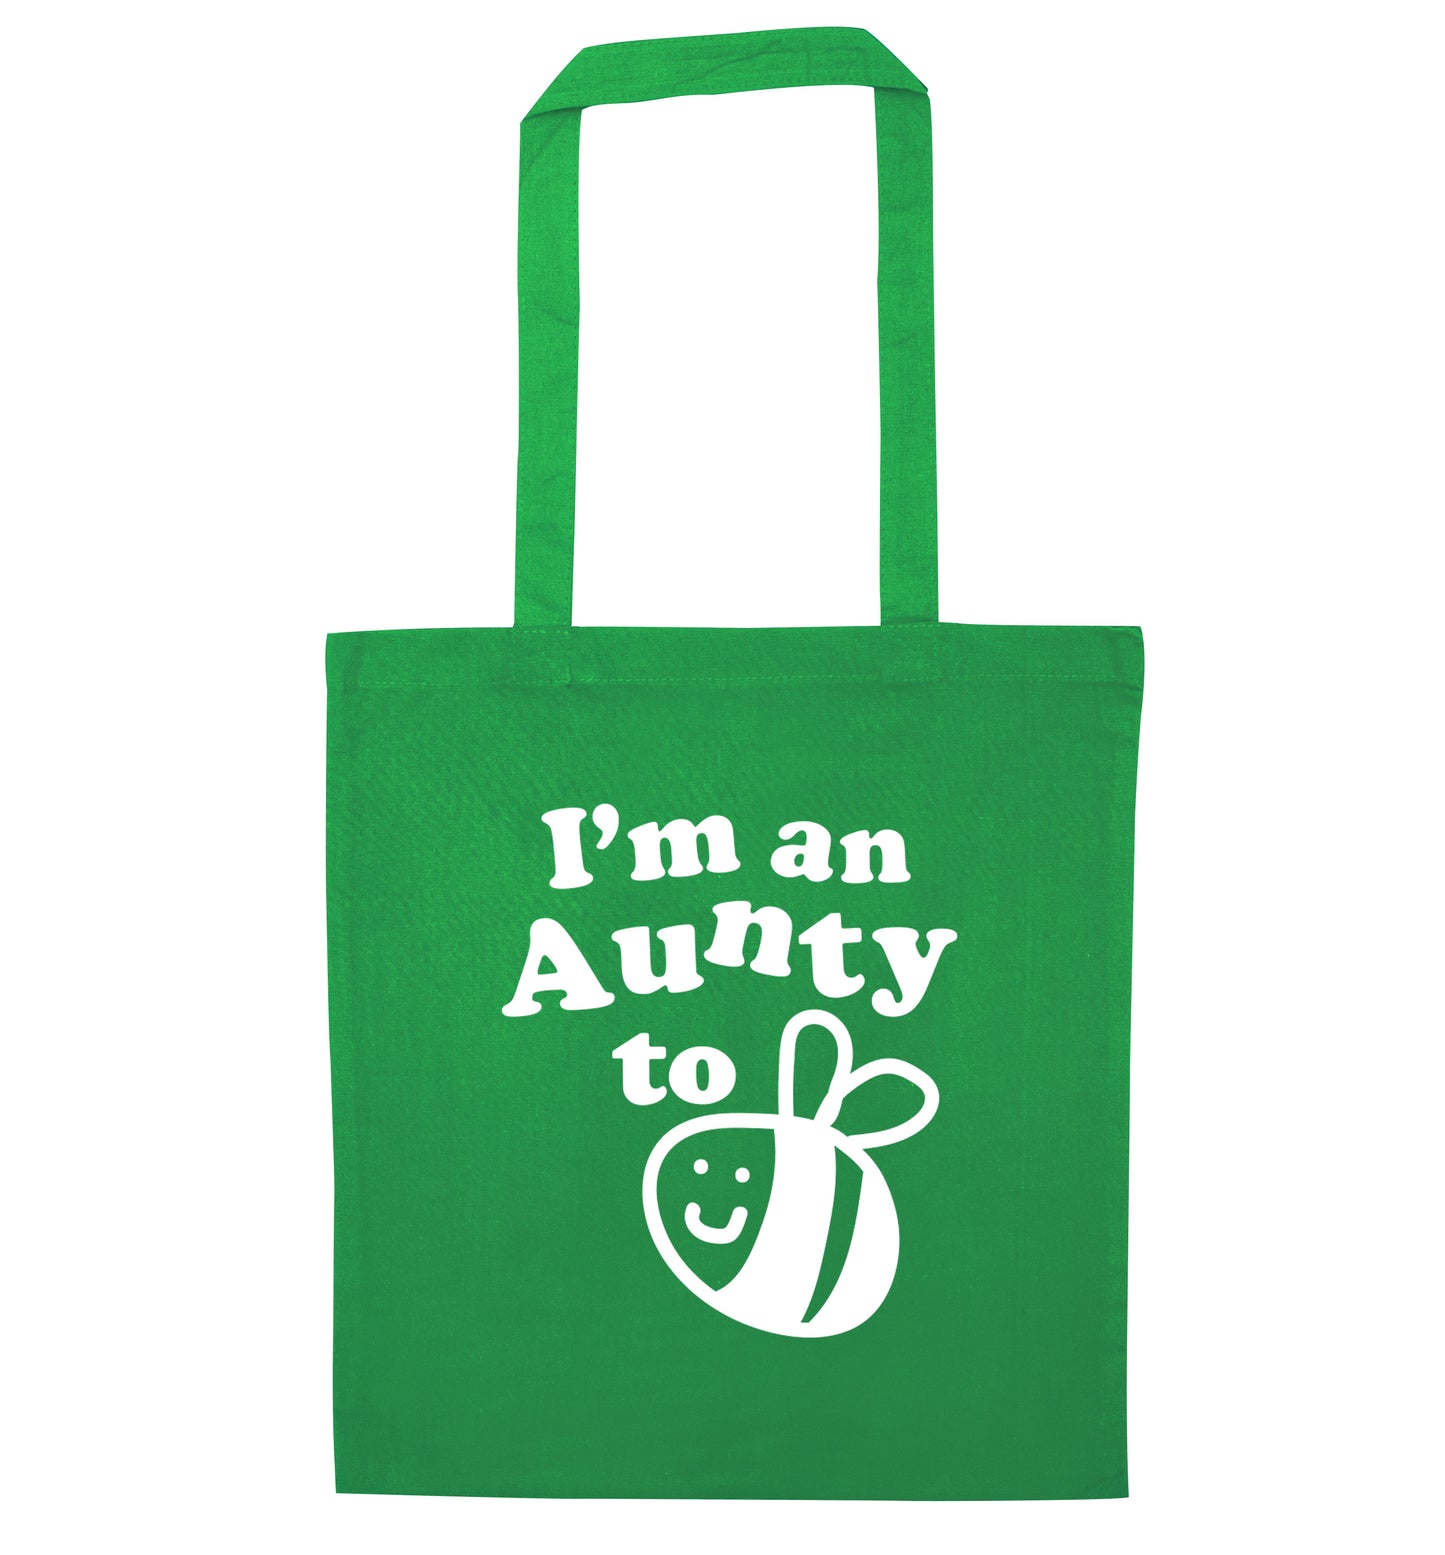 I'm an aunty to be green tote bag